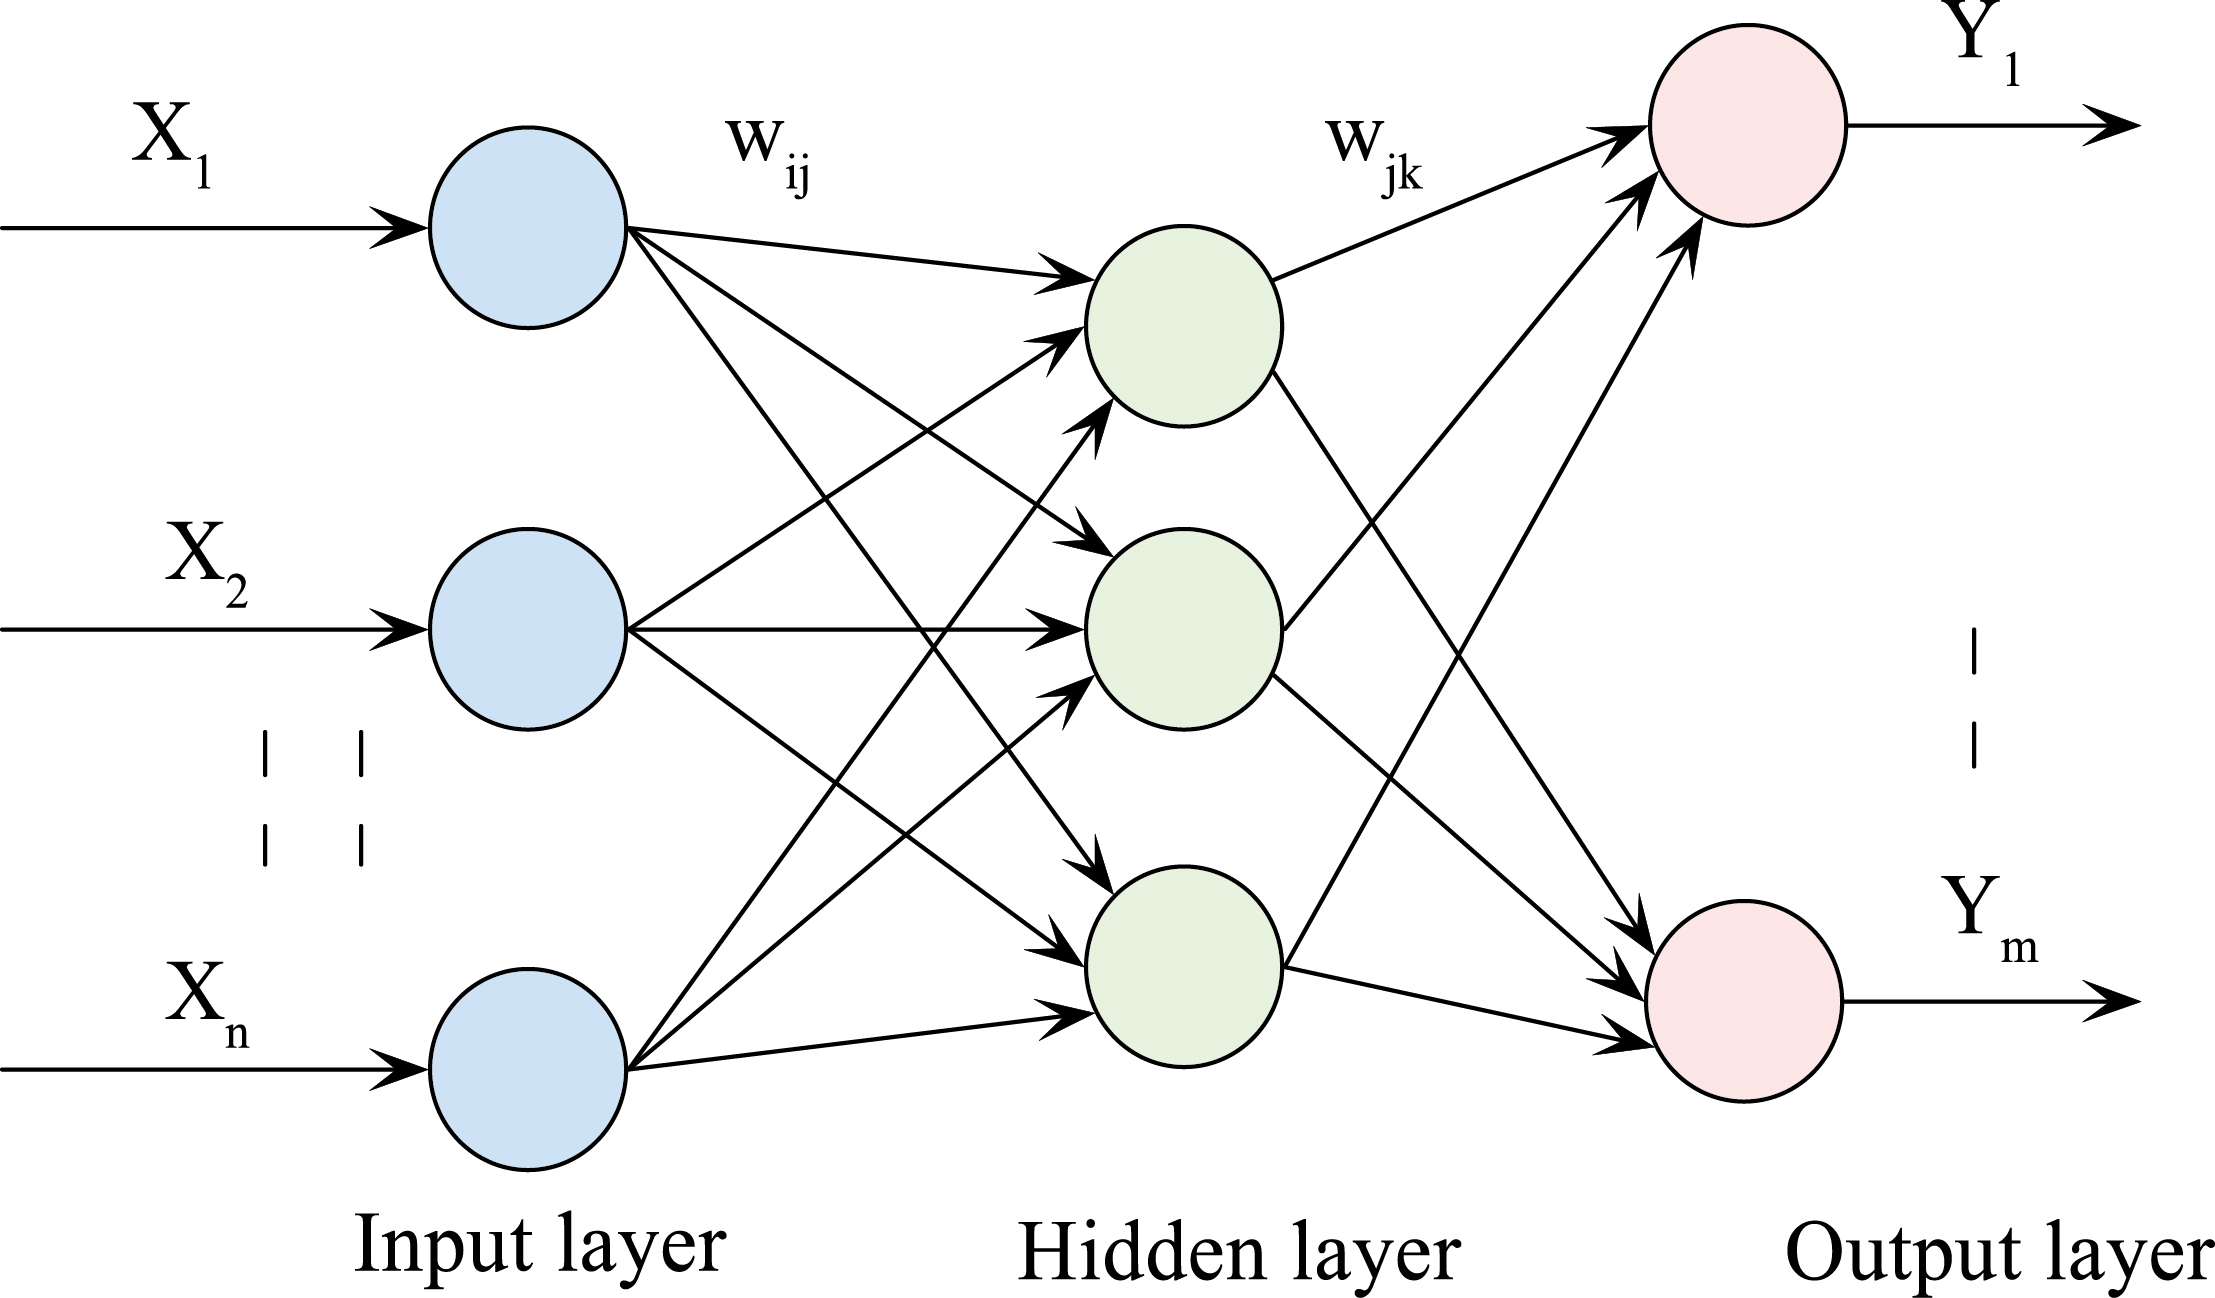 Topology structure of the BP neural network.